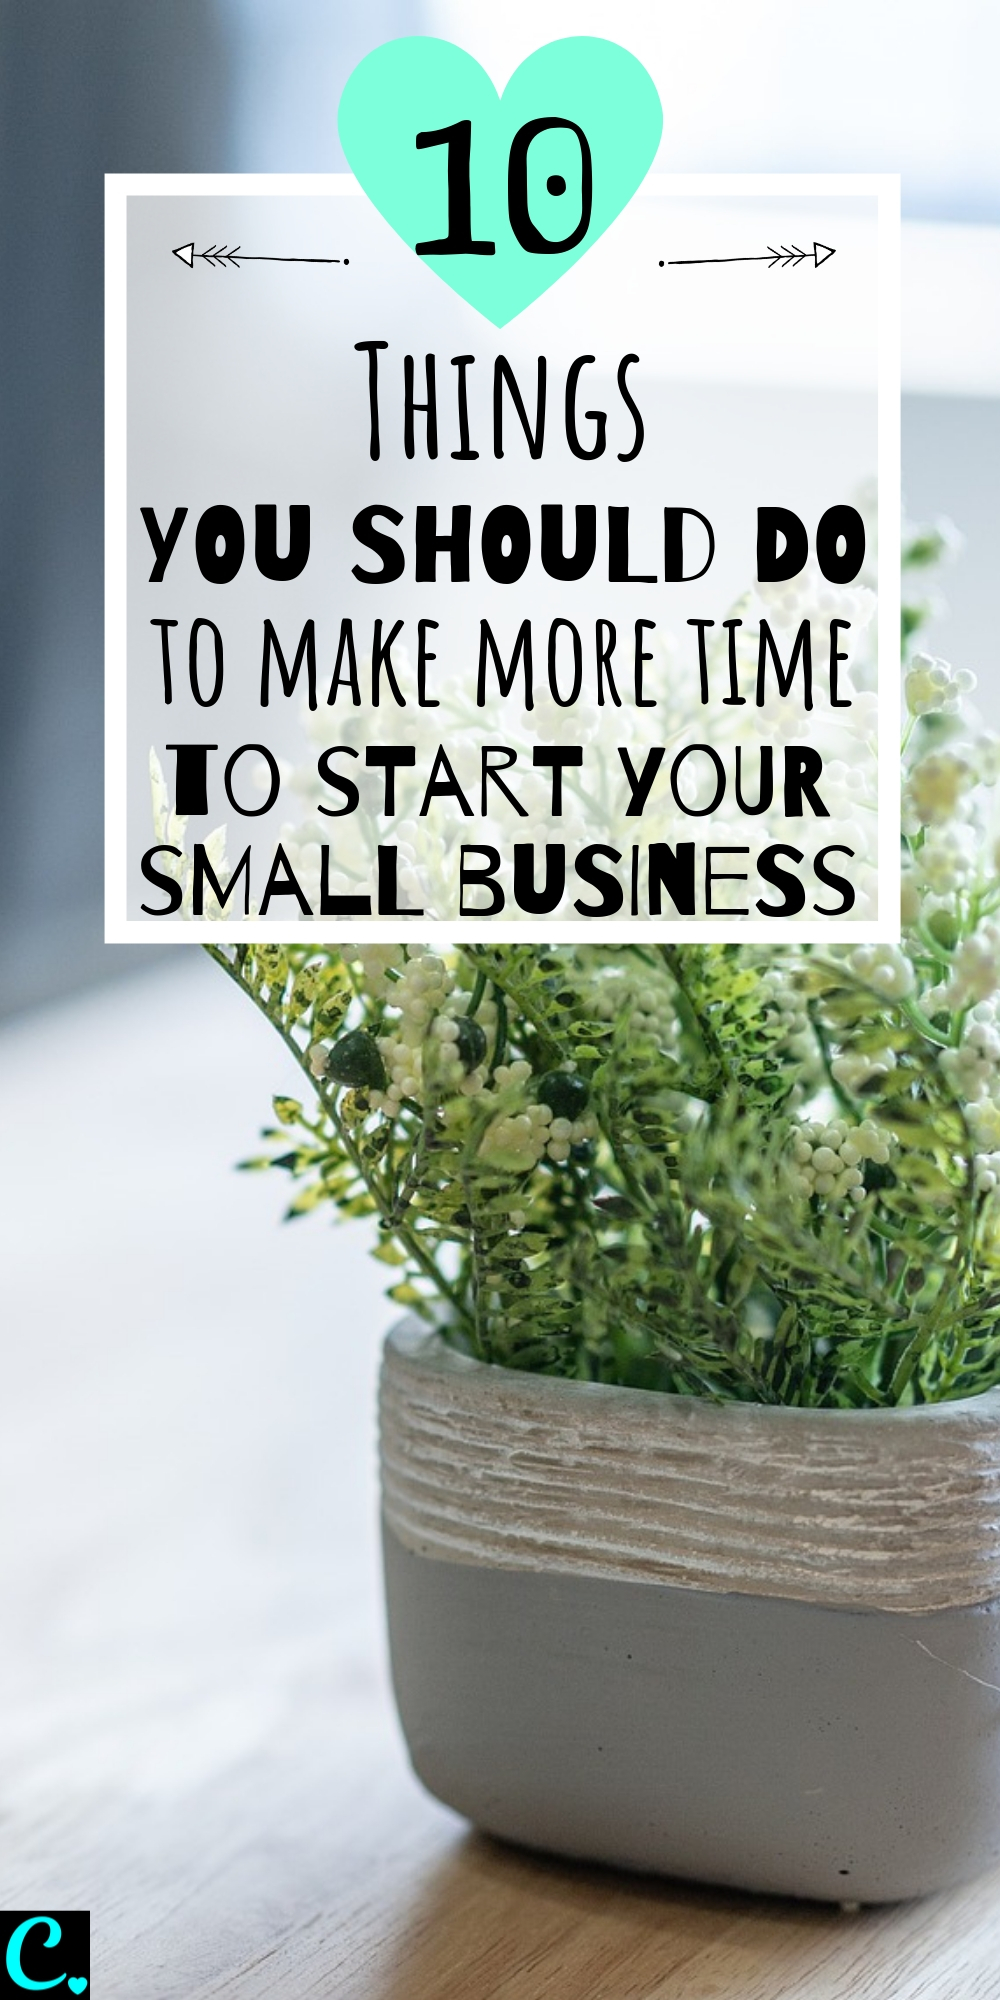 Are You Struggling To Find The Time To Start Your Small Business? These 10 Tips Will Help You Discover More Time In Your Already Busy Day To Get More Done Without Working Harder! #quiz #captivatingcrazy